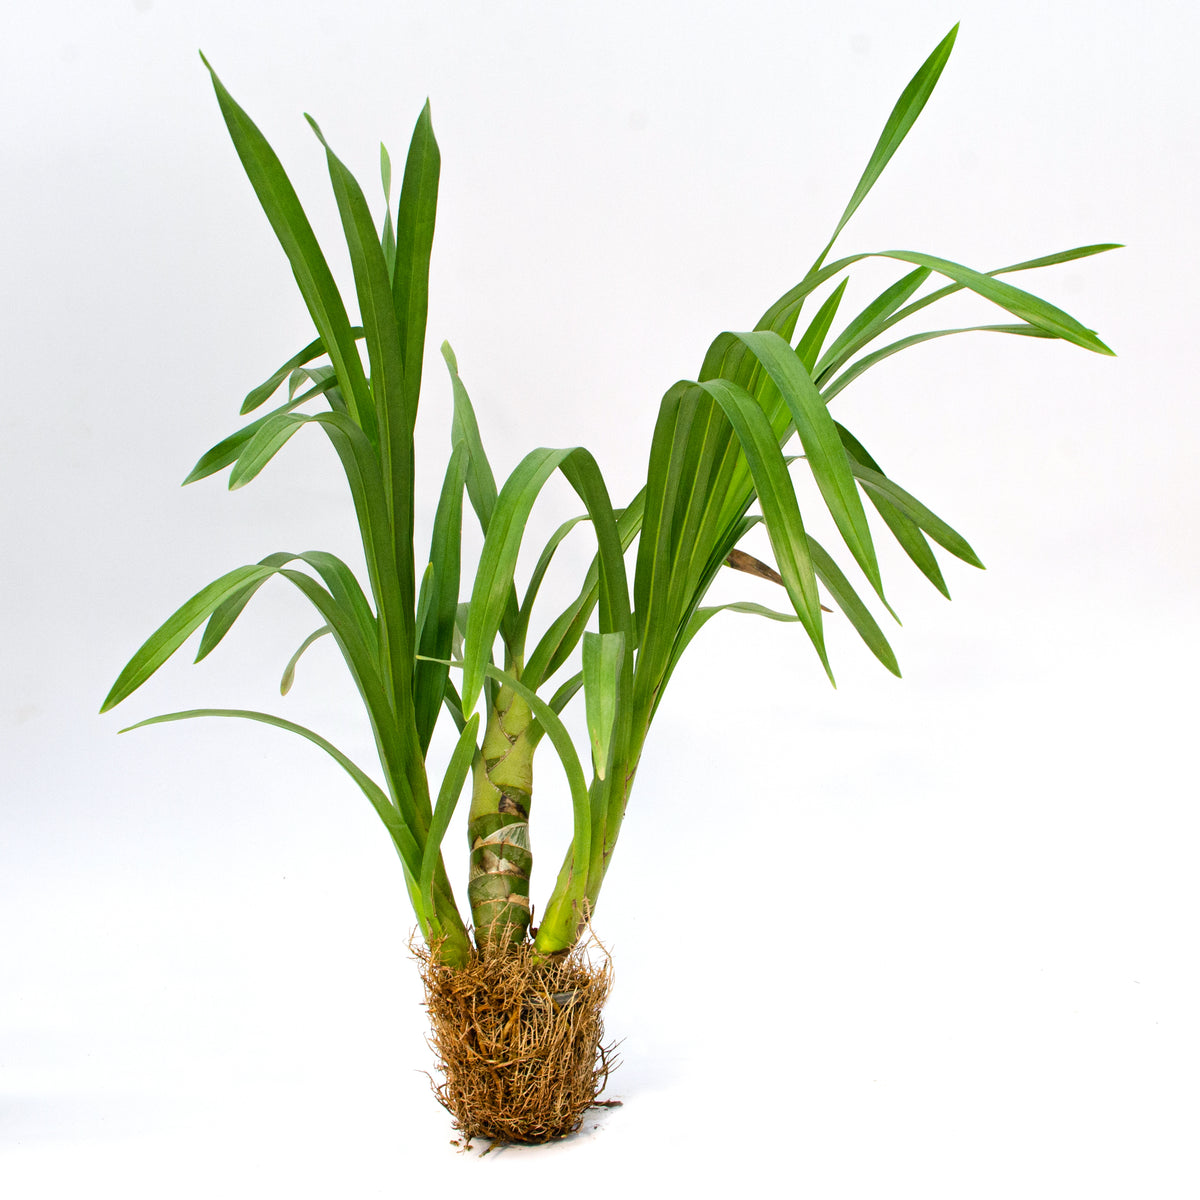 Grammatophyllum Speciosum Var. Alba Live Orchid Plant - Embrace the Majestic Beauty of Nature in Your Home